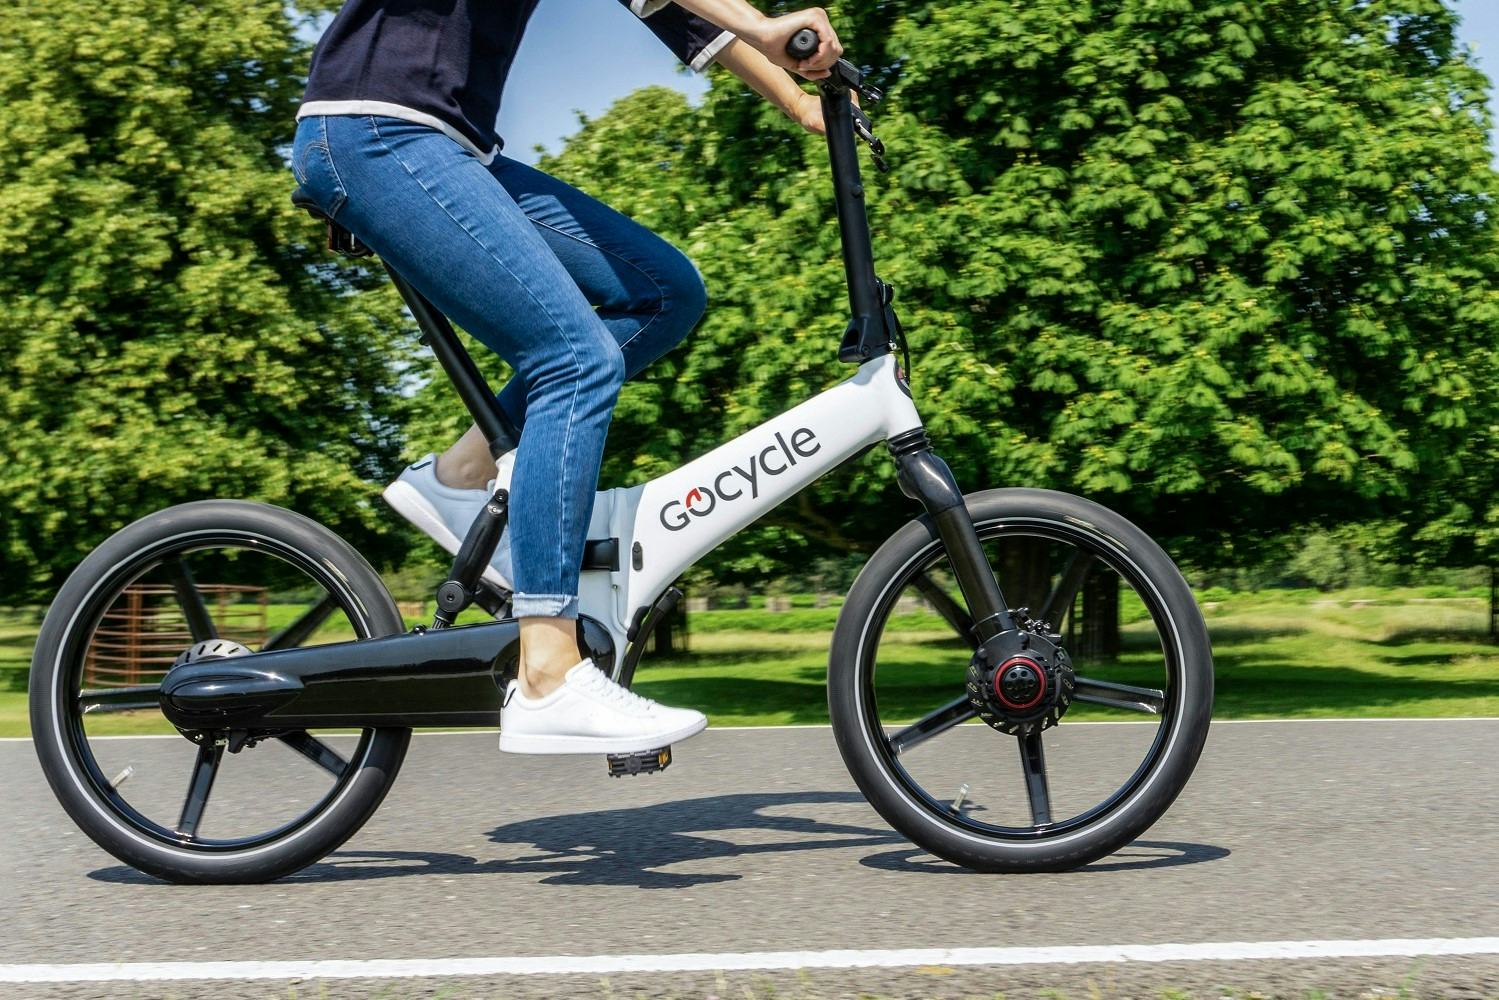 Gocycle has announced the opening of its new European subsidiary in the Netherlands. – Photo Gocycle